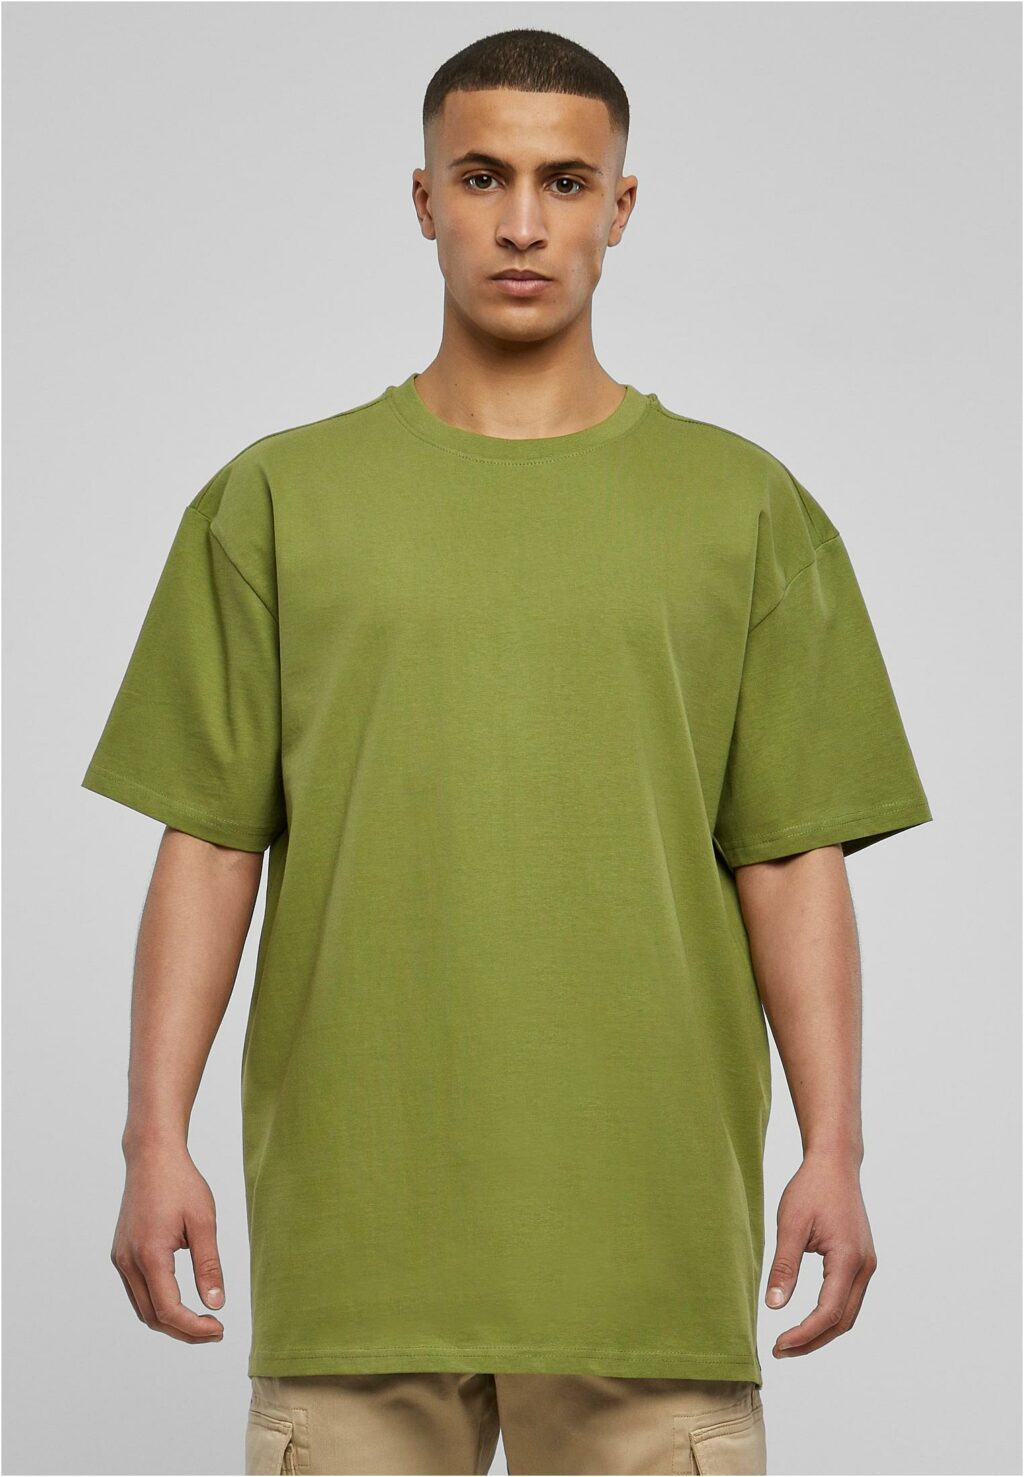 Urban Classics Heavy Oversized Tee 2-Pack newolive+white TB1778A